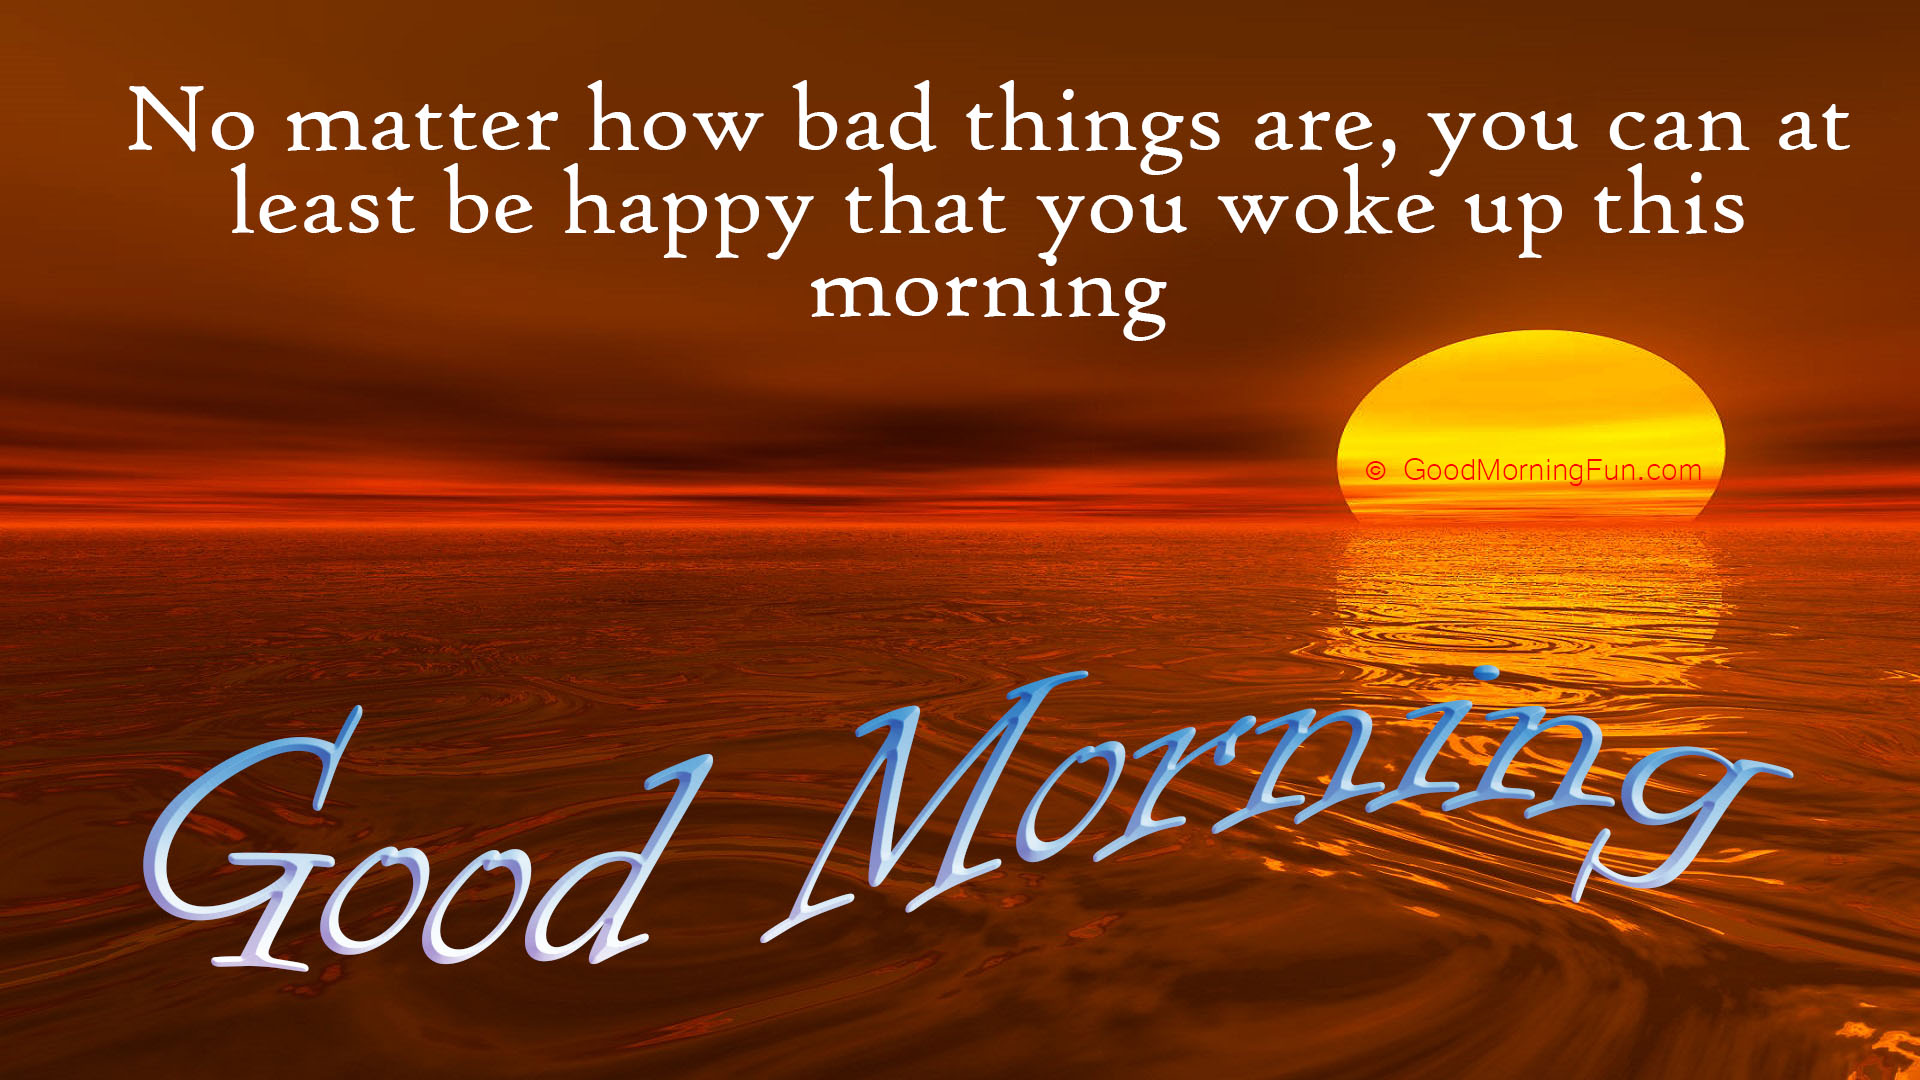 Good Morning Quotes To Wake Up With Happy Thoughts - Good Morning Fun